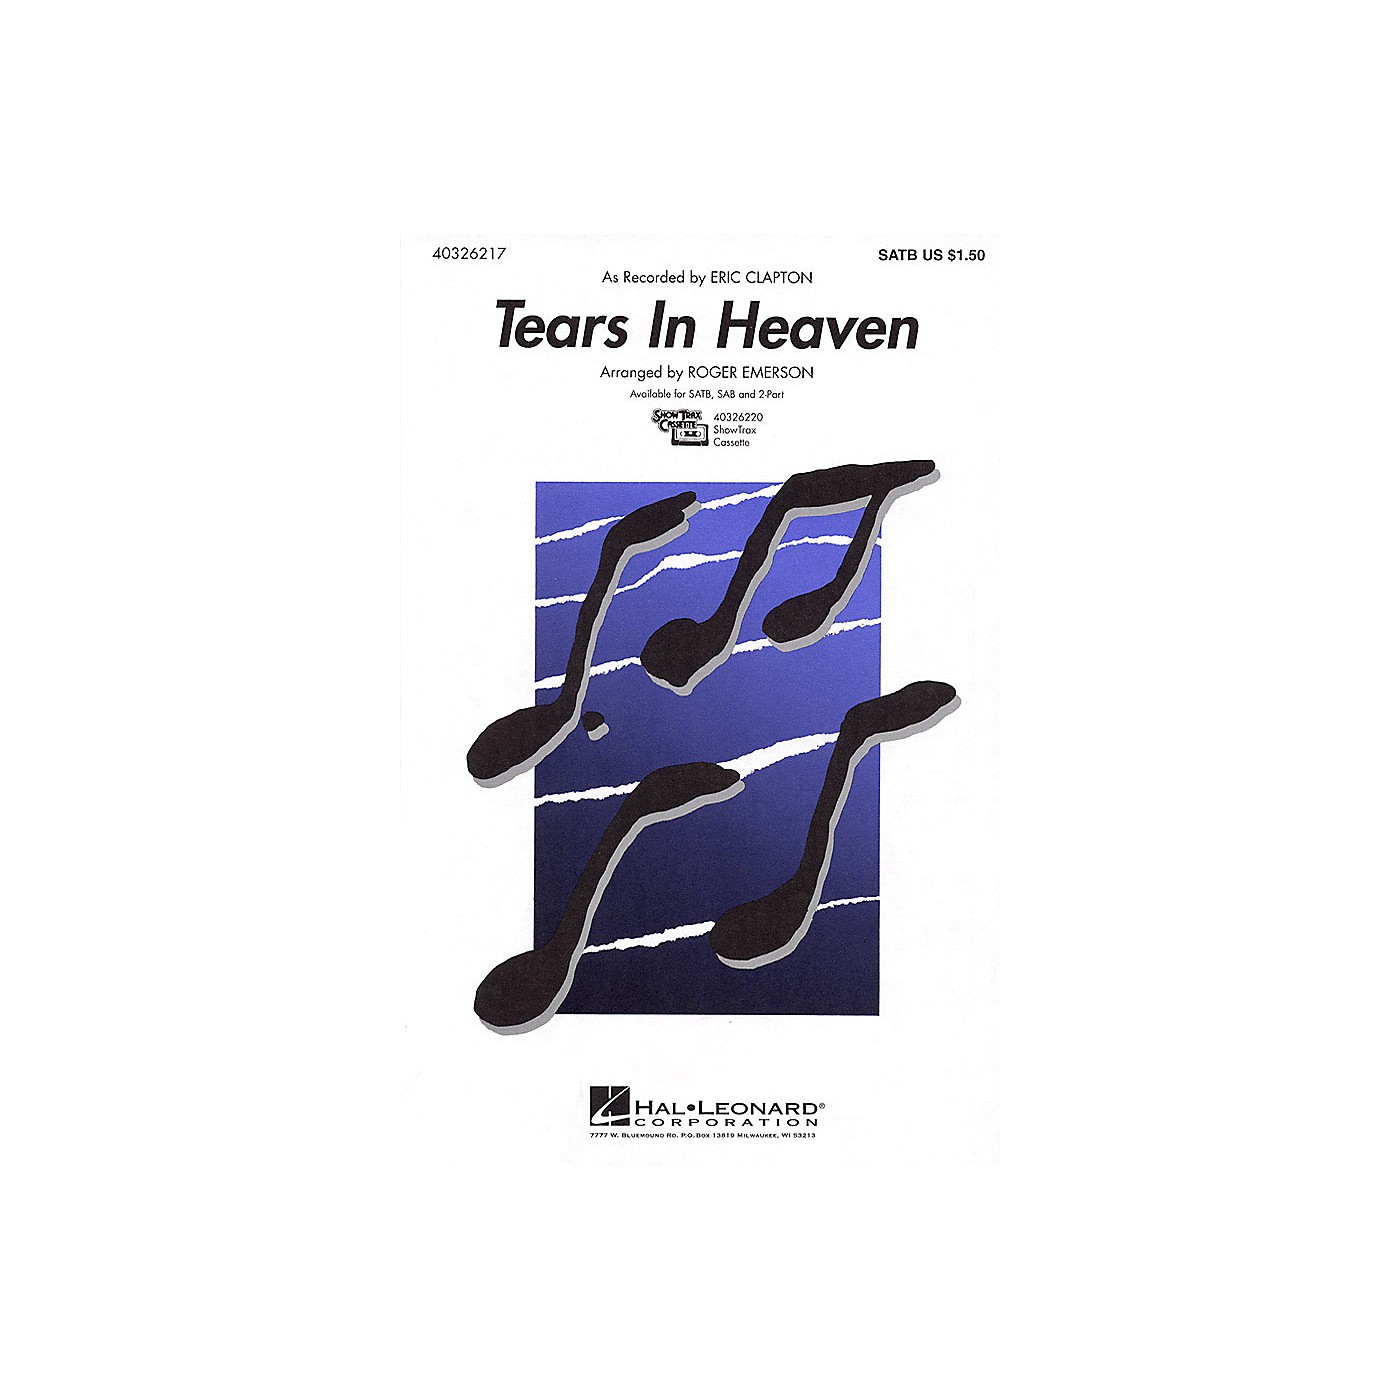 Hal Leonard Tears in Heaven ShowTrax CD by Eric Clapton Arranged by Roger Emerson thumbnail